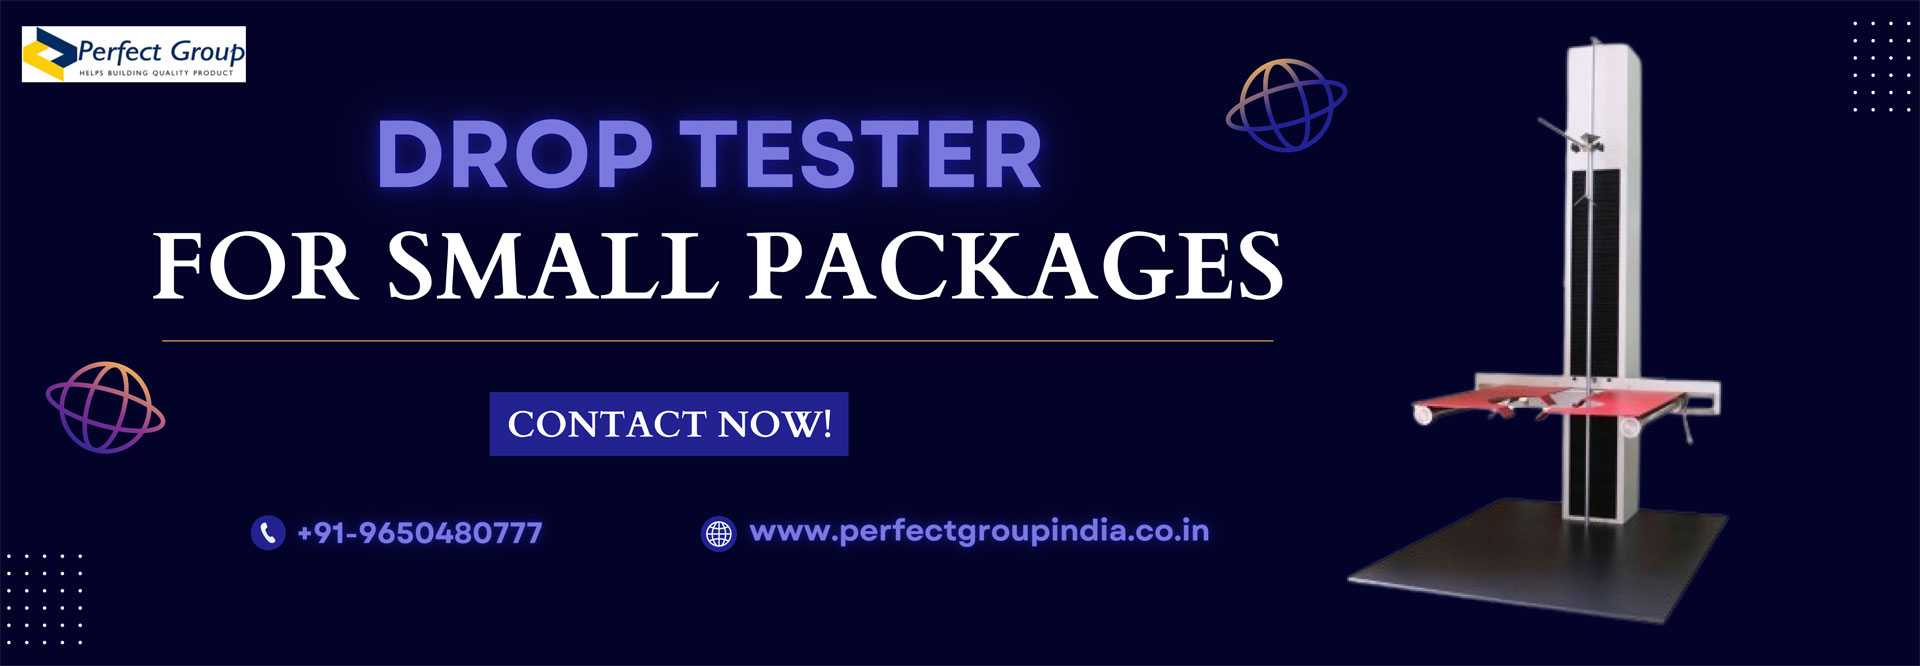 Drop Tester For Small Packages